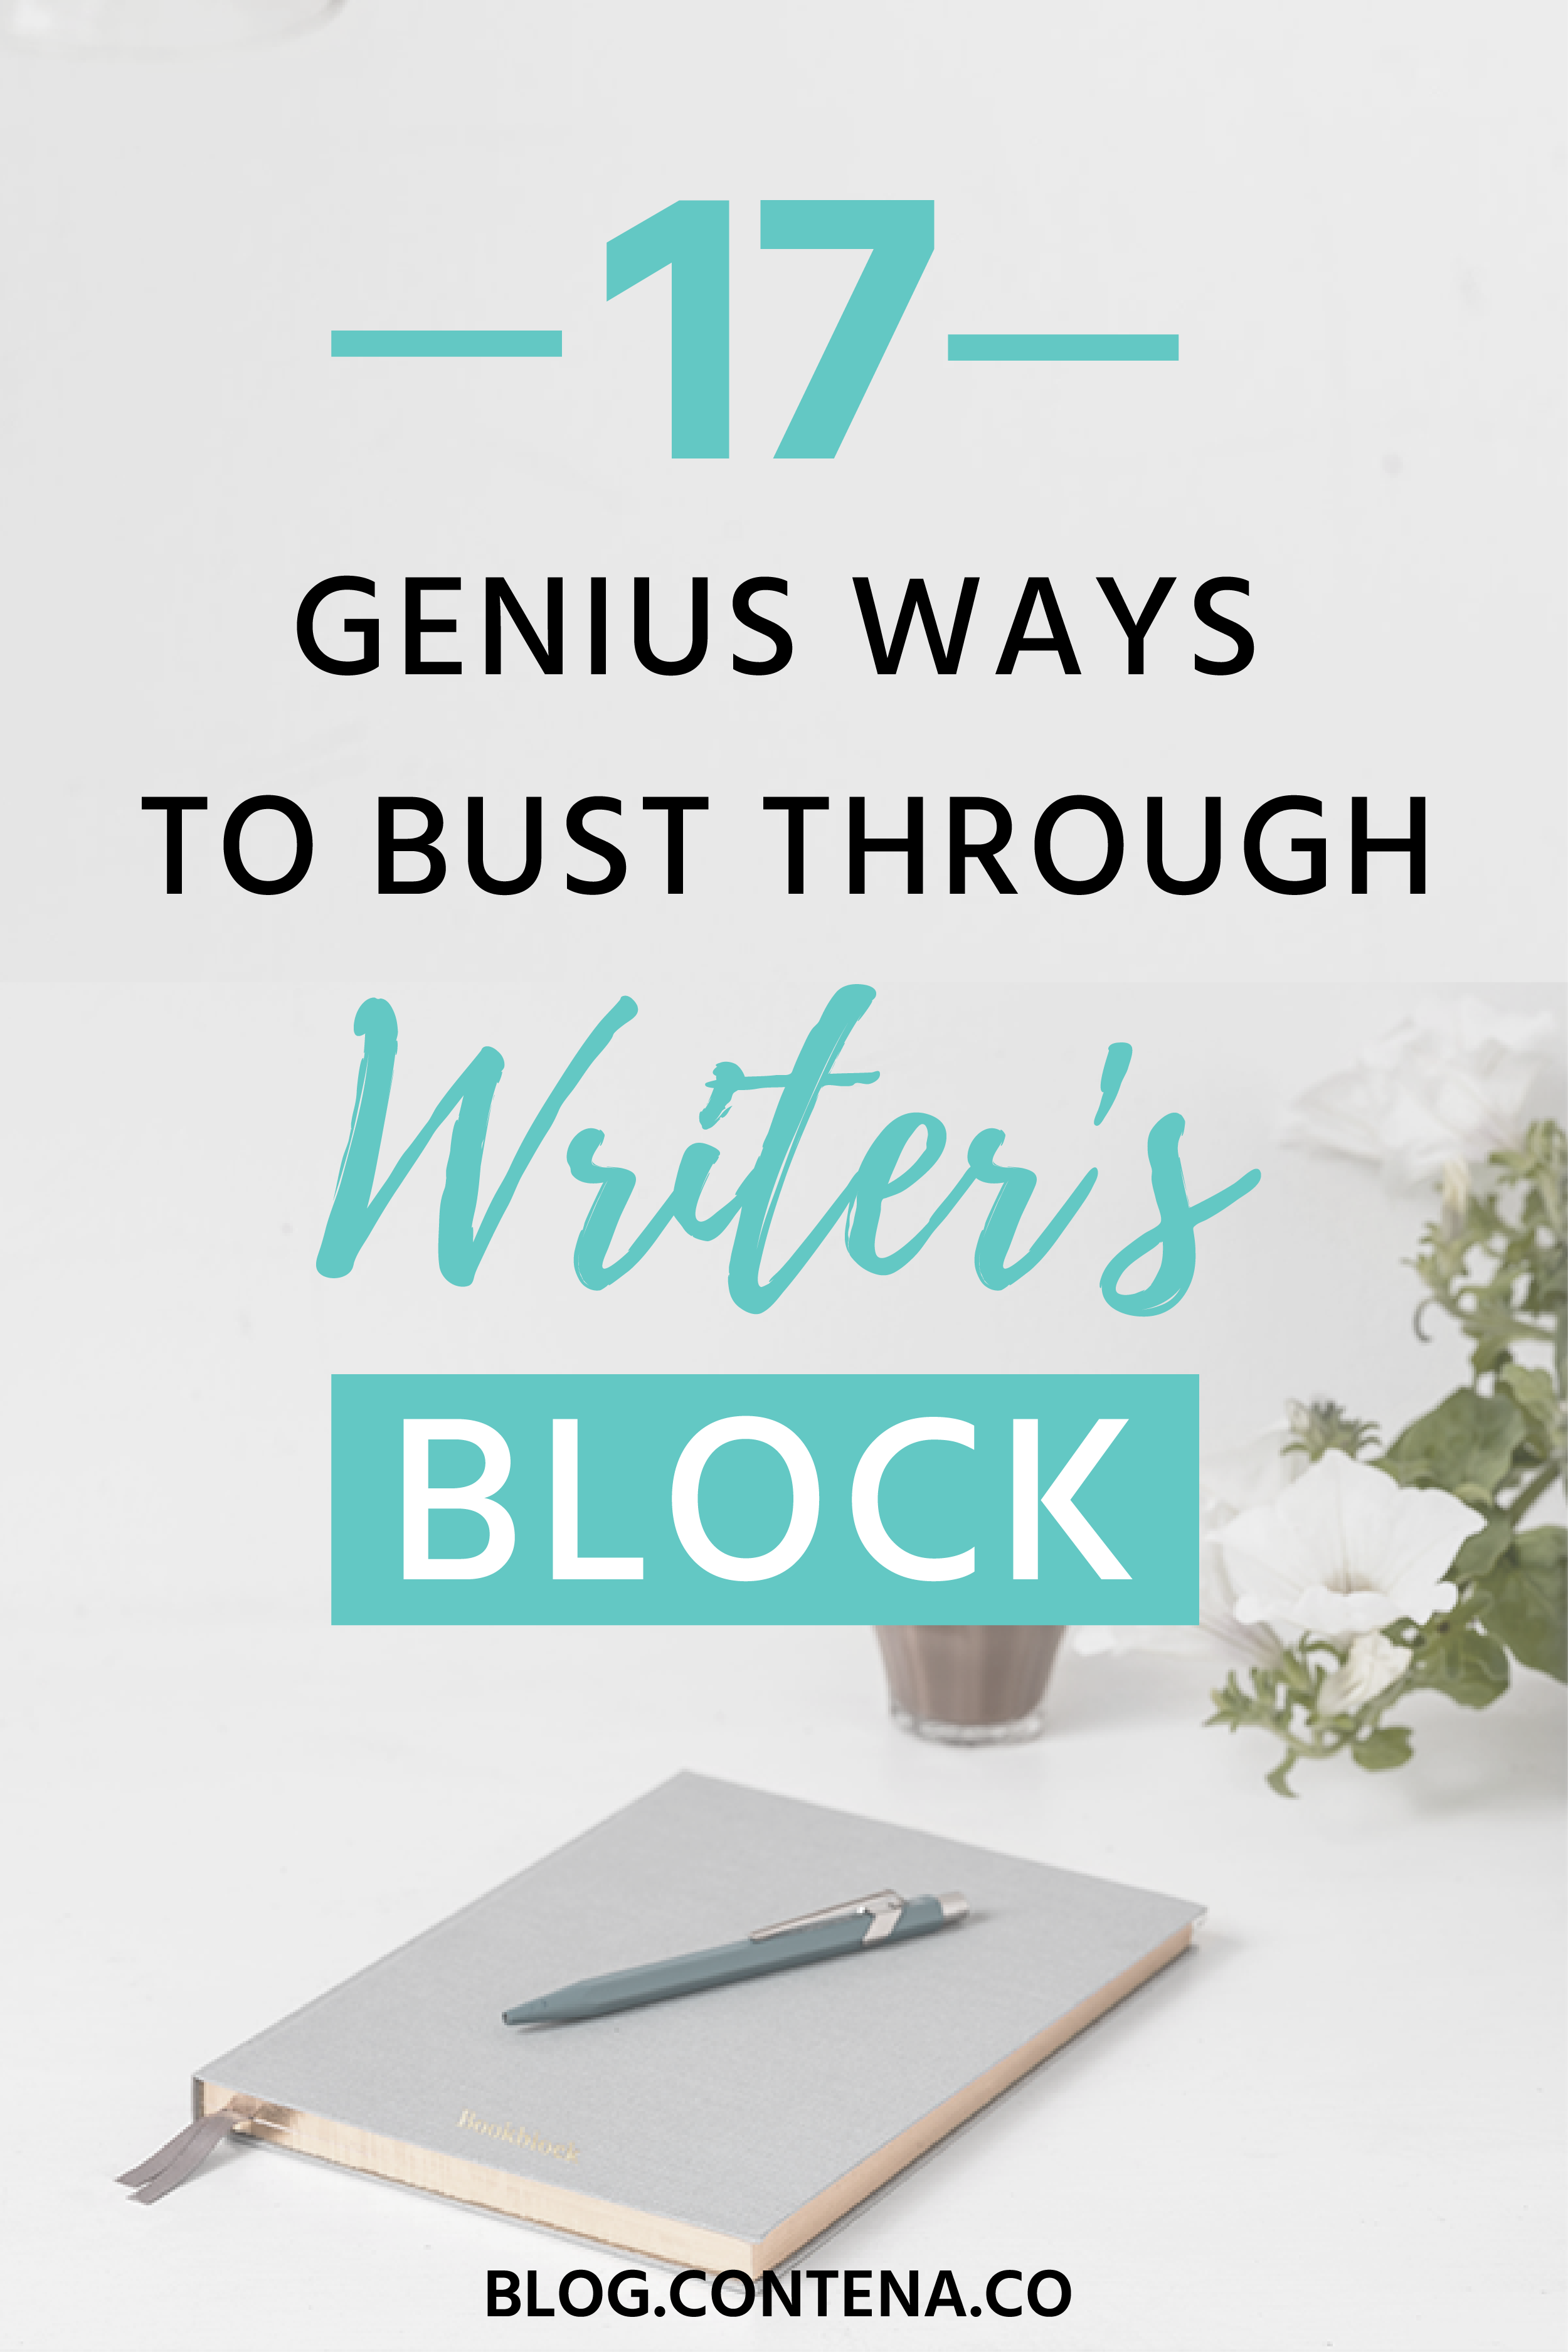 Freelance writers sometimes get writer’s block. These are the best tips to deal with writer’s block. If you’re a beginner freelancer or an experienced freelance writer, sometimes you’ll get stuck- writing samples, blogs, articles- it’s awful! Here’s how to bust through writer’s block. #WritersBlock #WritingTips #FreelanceWriting #Freelancer #WorkFromHome #SideHustle #Money #OnlineBusiness #Writing #WritingJobs #Money